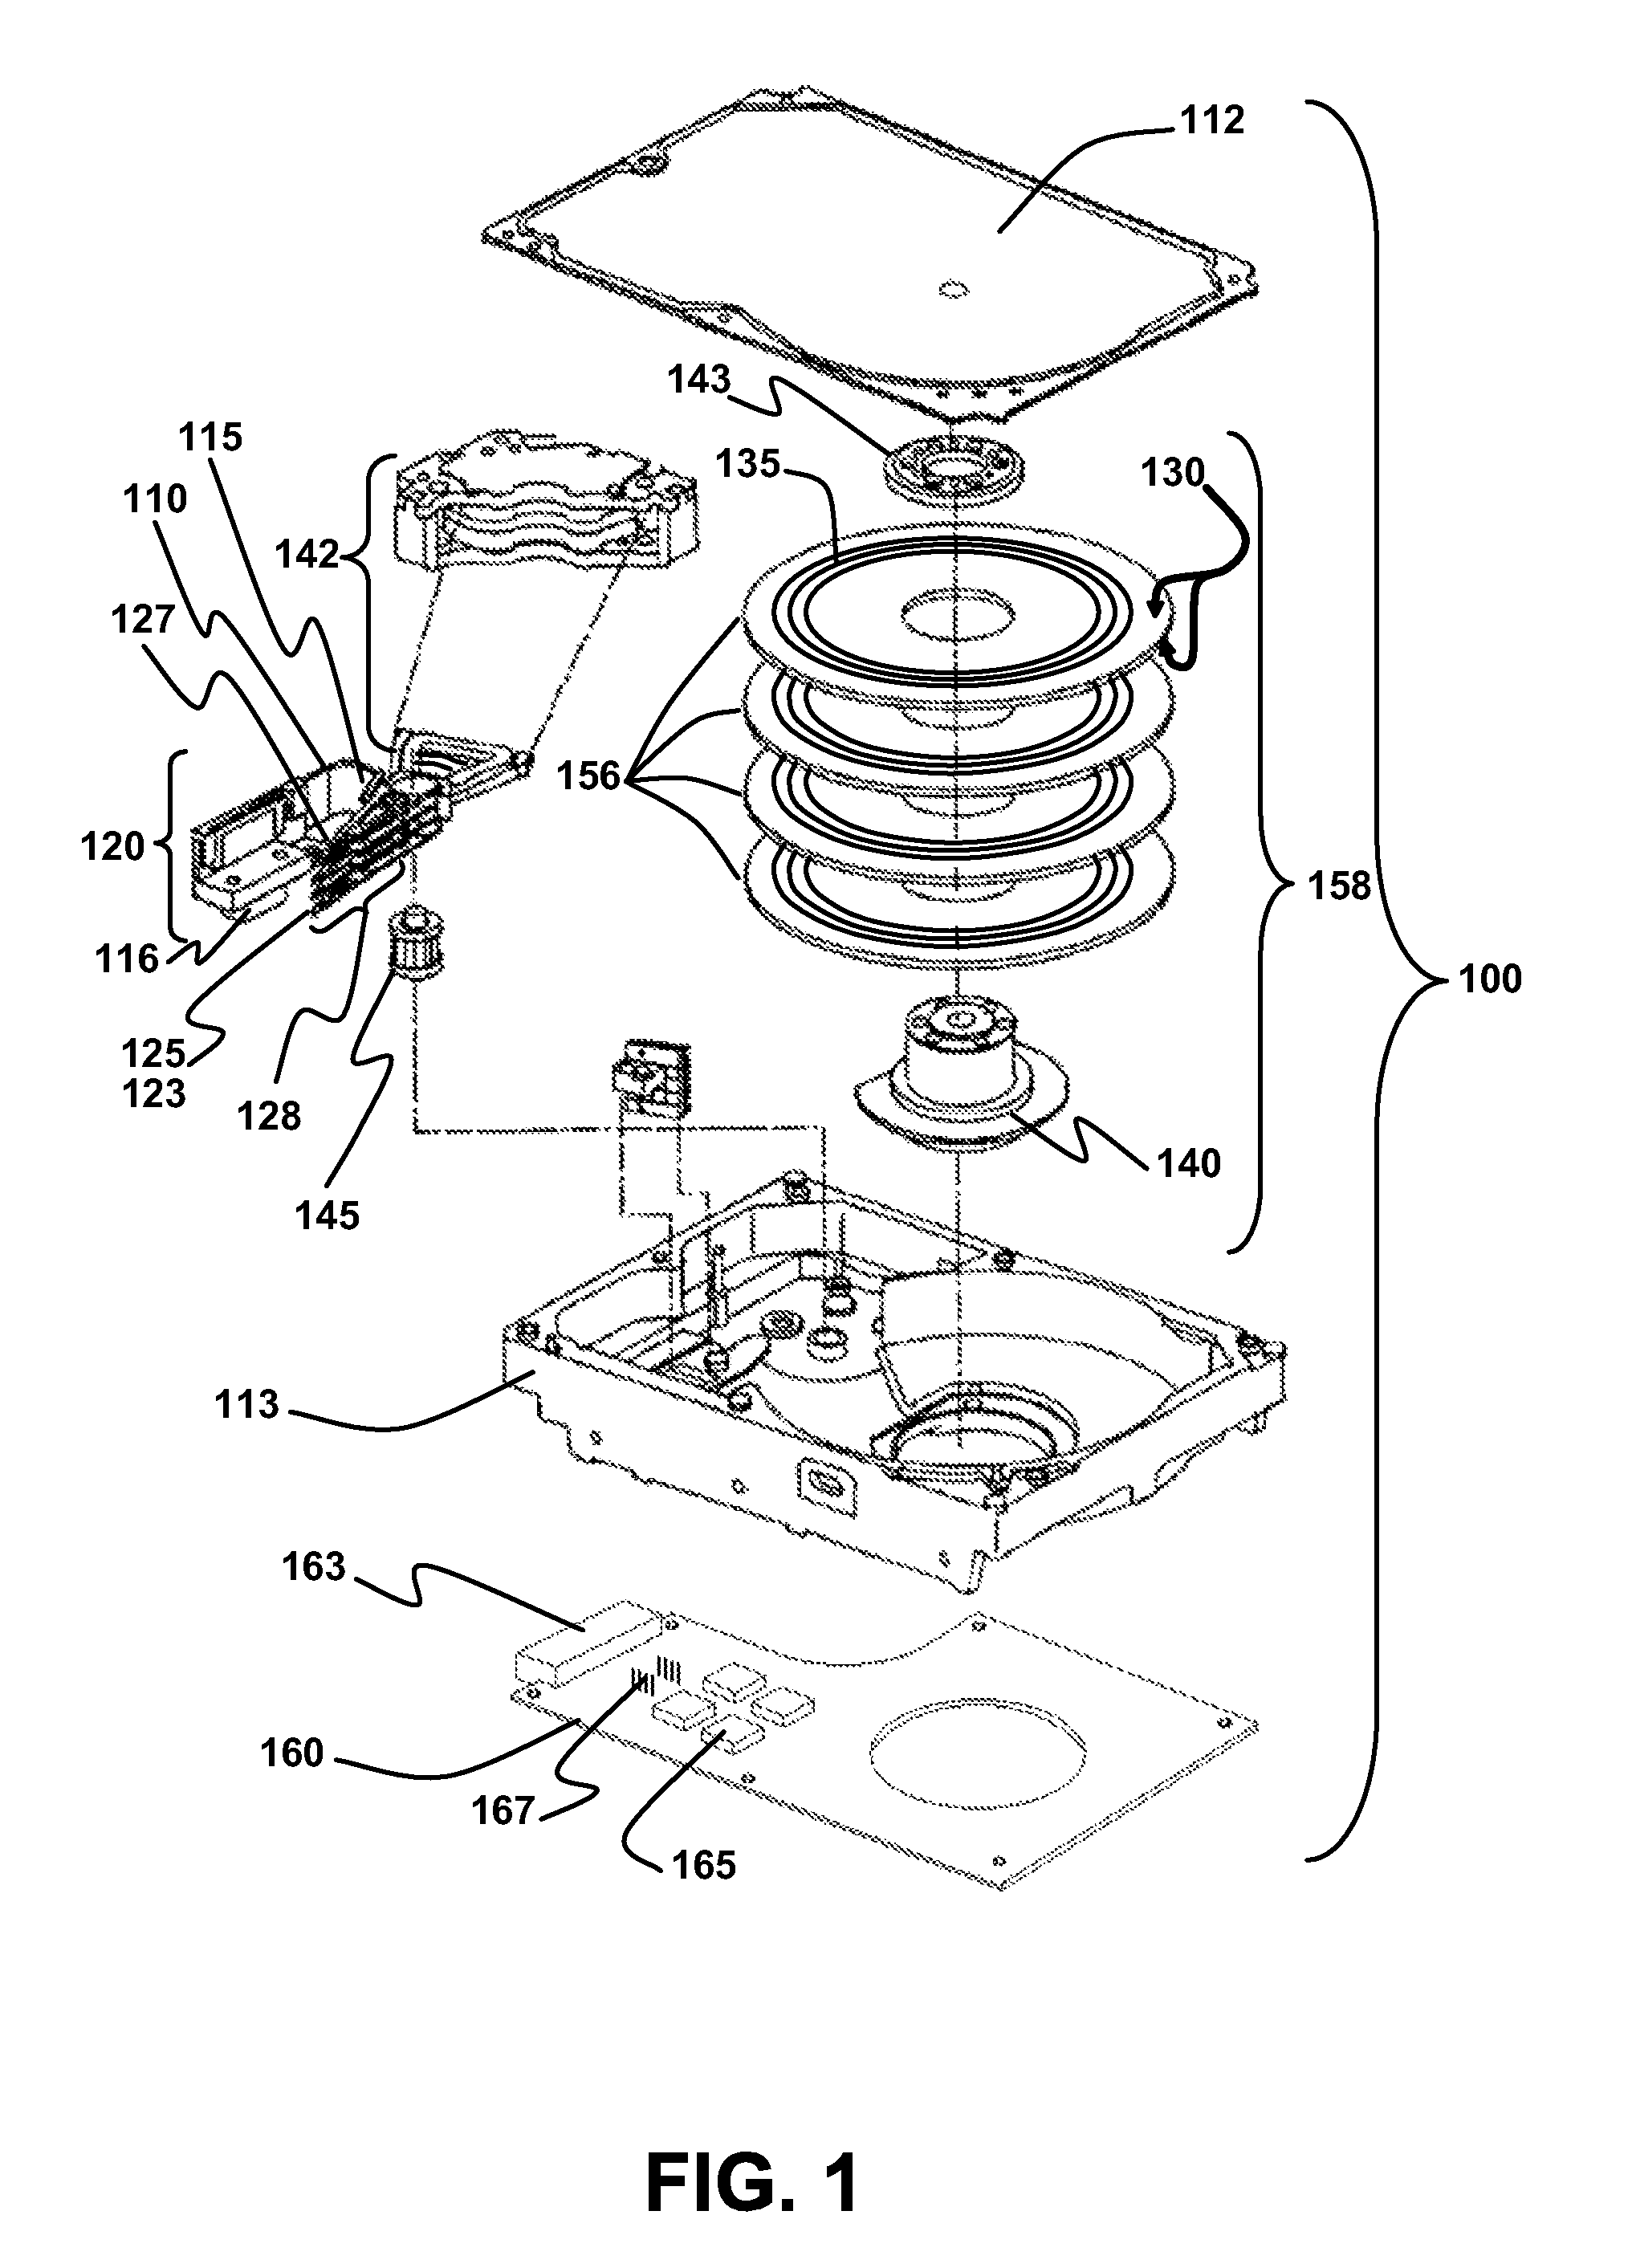 Symmetrically tapered constrained layer damper for a flex cable assembly for a hard disk drive